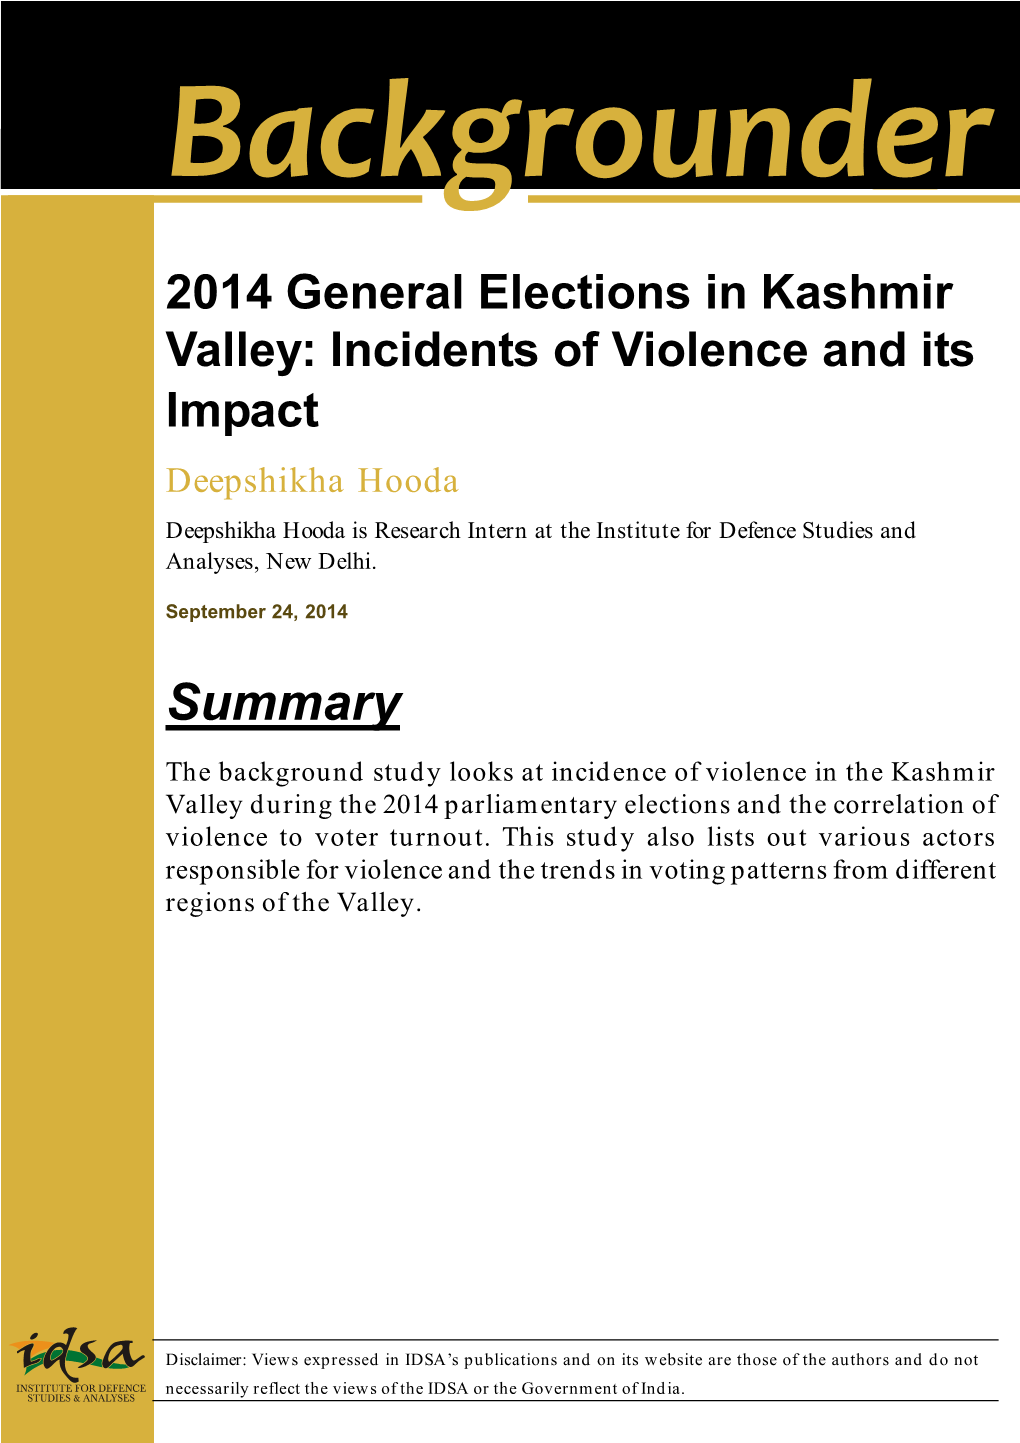 2014 General Elections in Kashmir Valley: Incidents of Violence and Its Impact